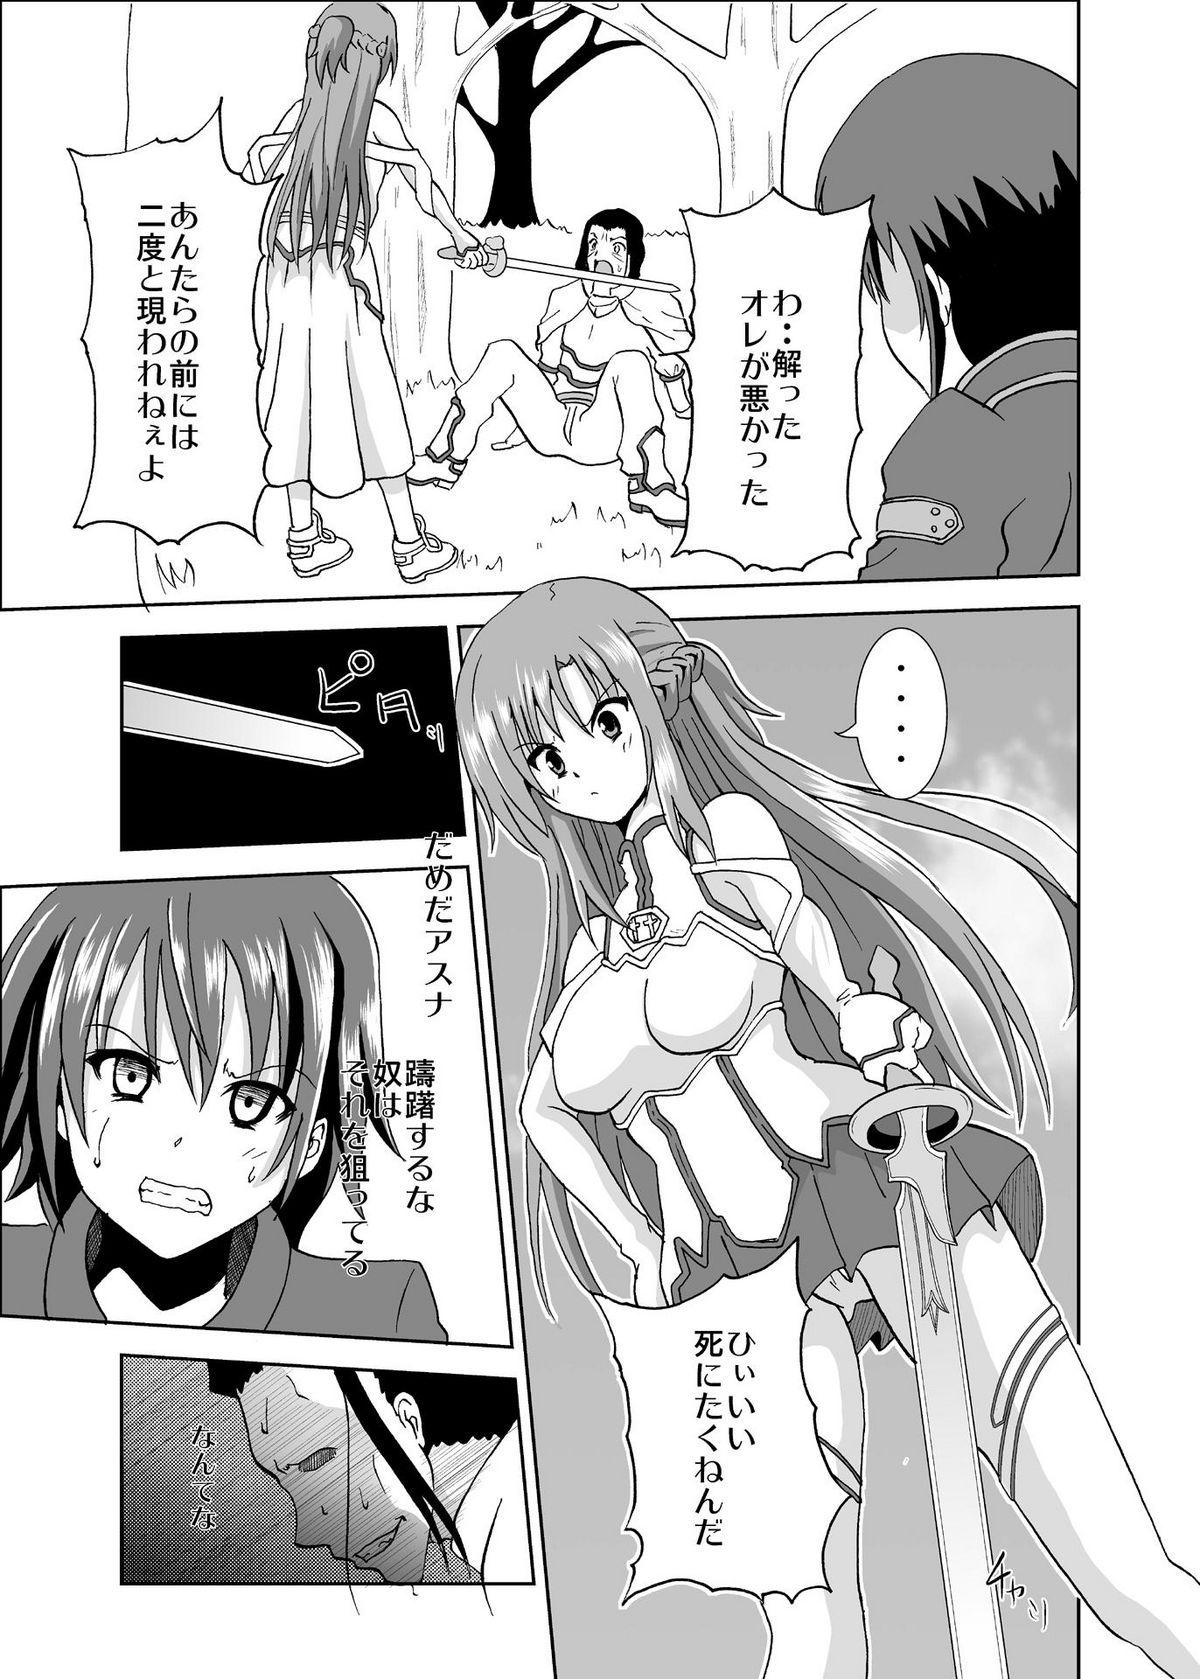 Pissing Defeated Heroine A - Sword art online Doggie Style Porn - Page 4